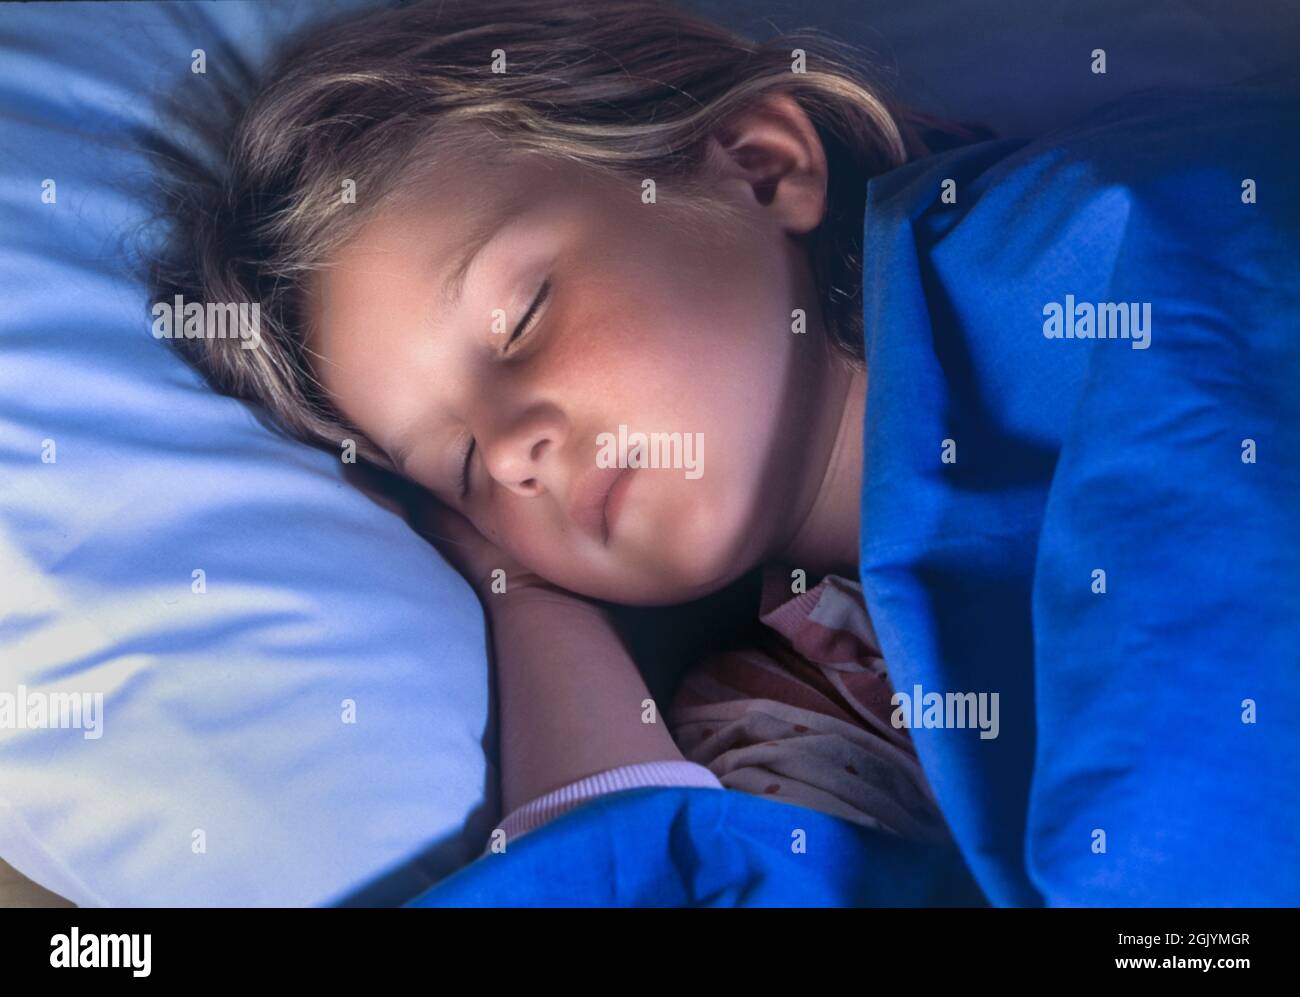 Sleeping asleep face rest young girl 6-8 years asleep with head on pillow in bed peacefully resting, in night time bed bedroom, secure healthy sleep in comfortable family home situation Stock Photo